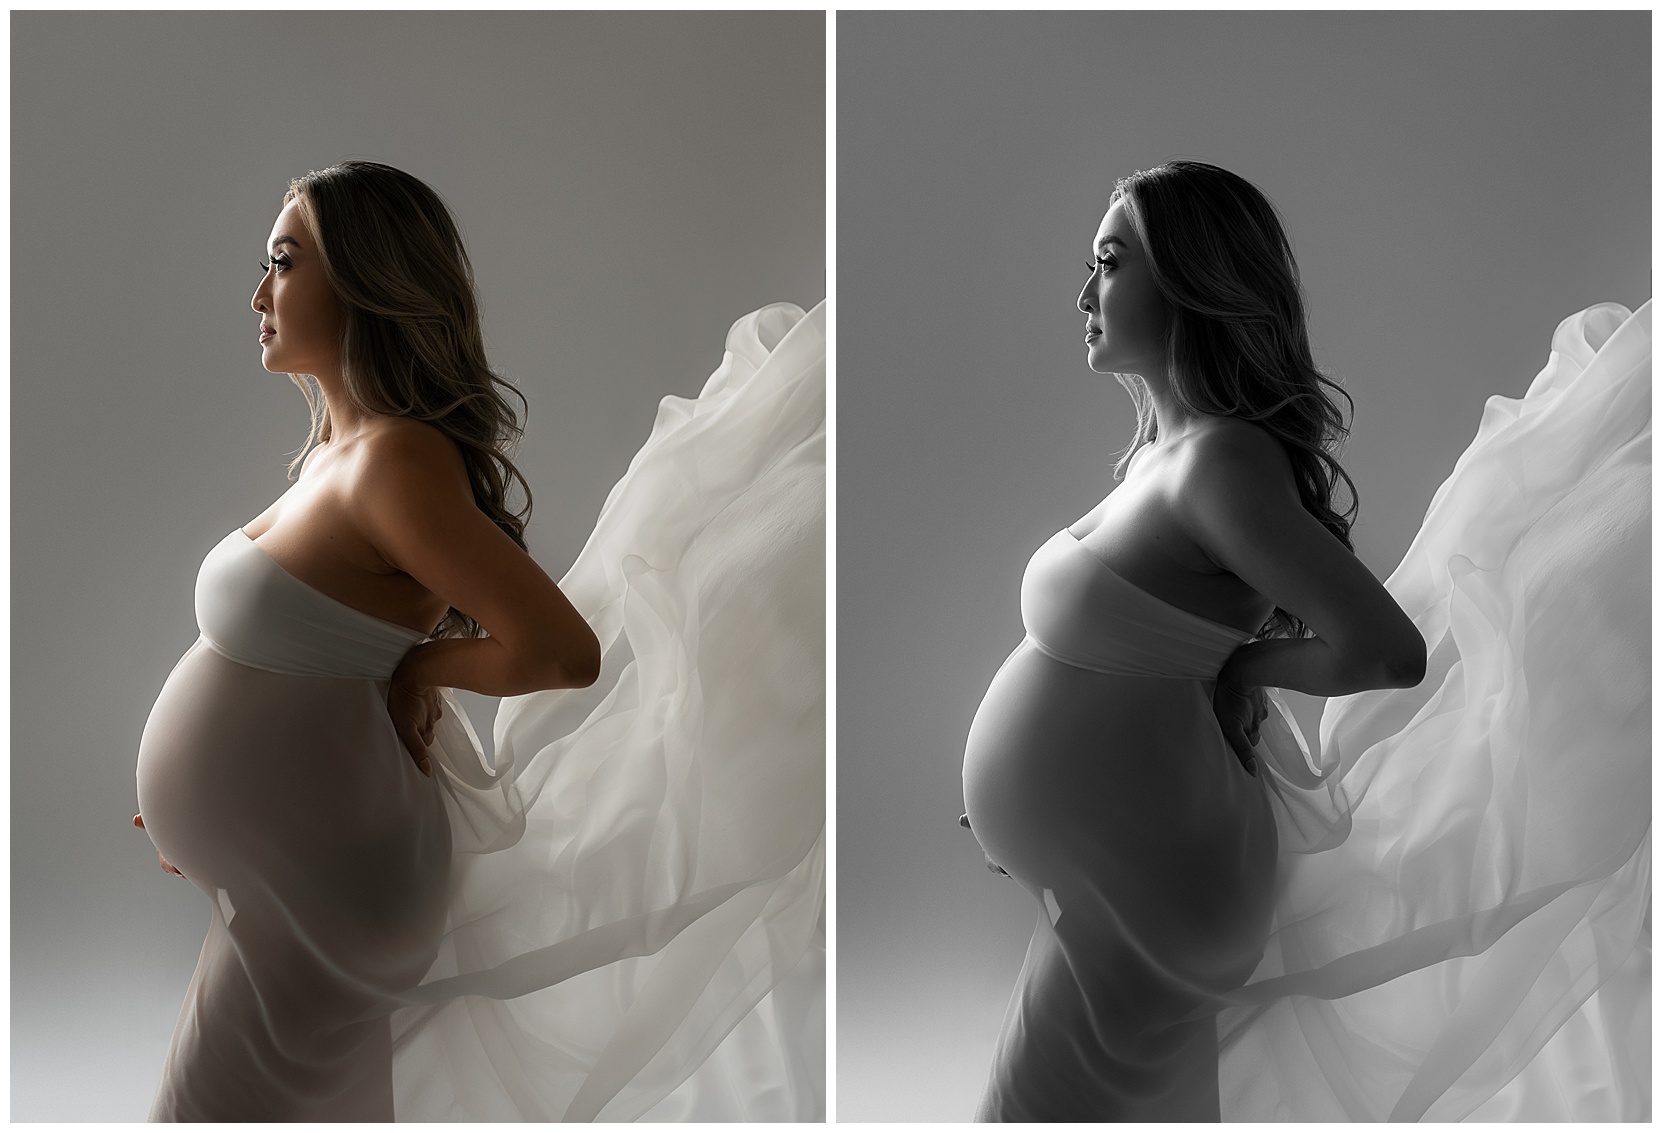 Two side-silhouettes of a pregnant woman, one in black and white. She is wearing a flowing white gown